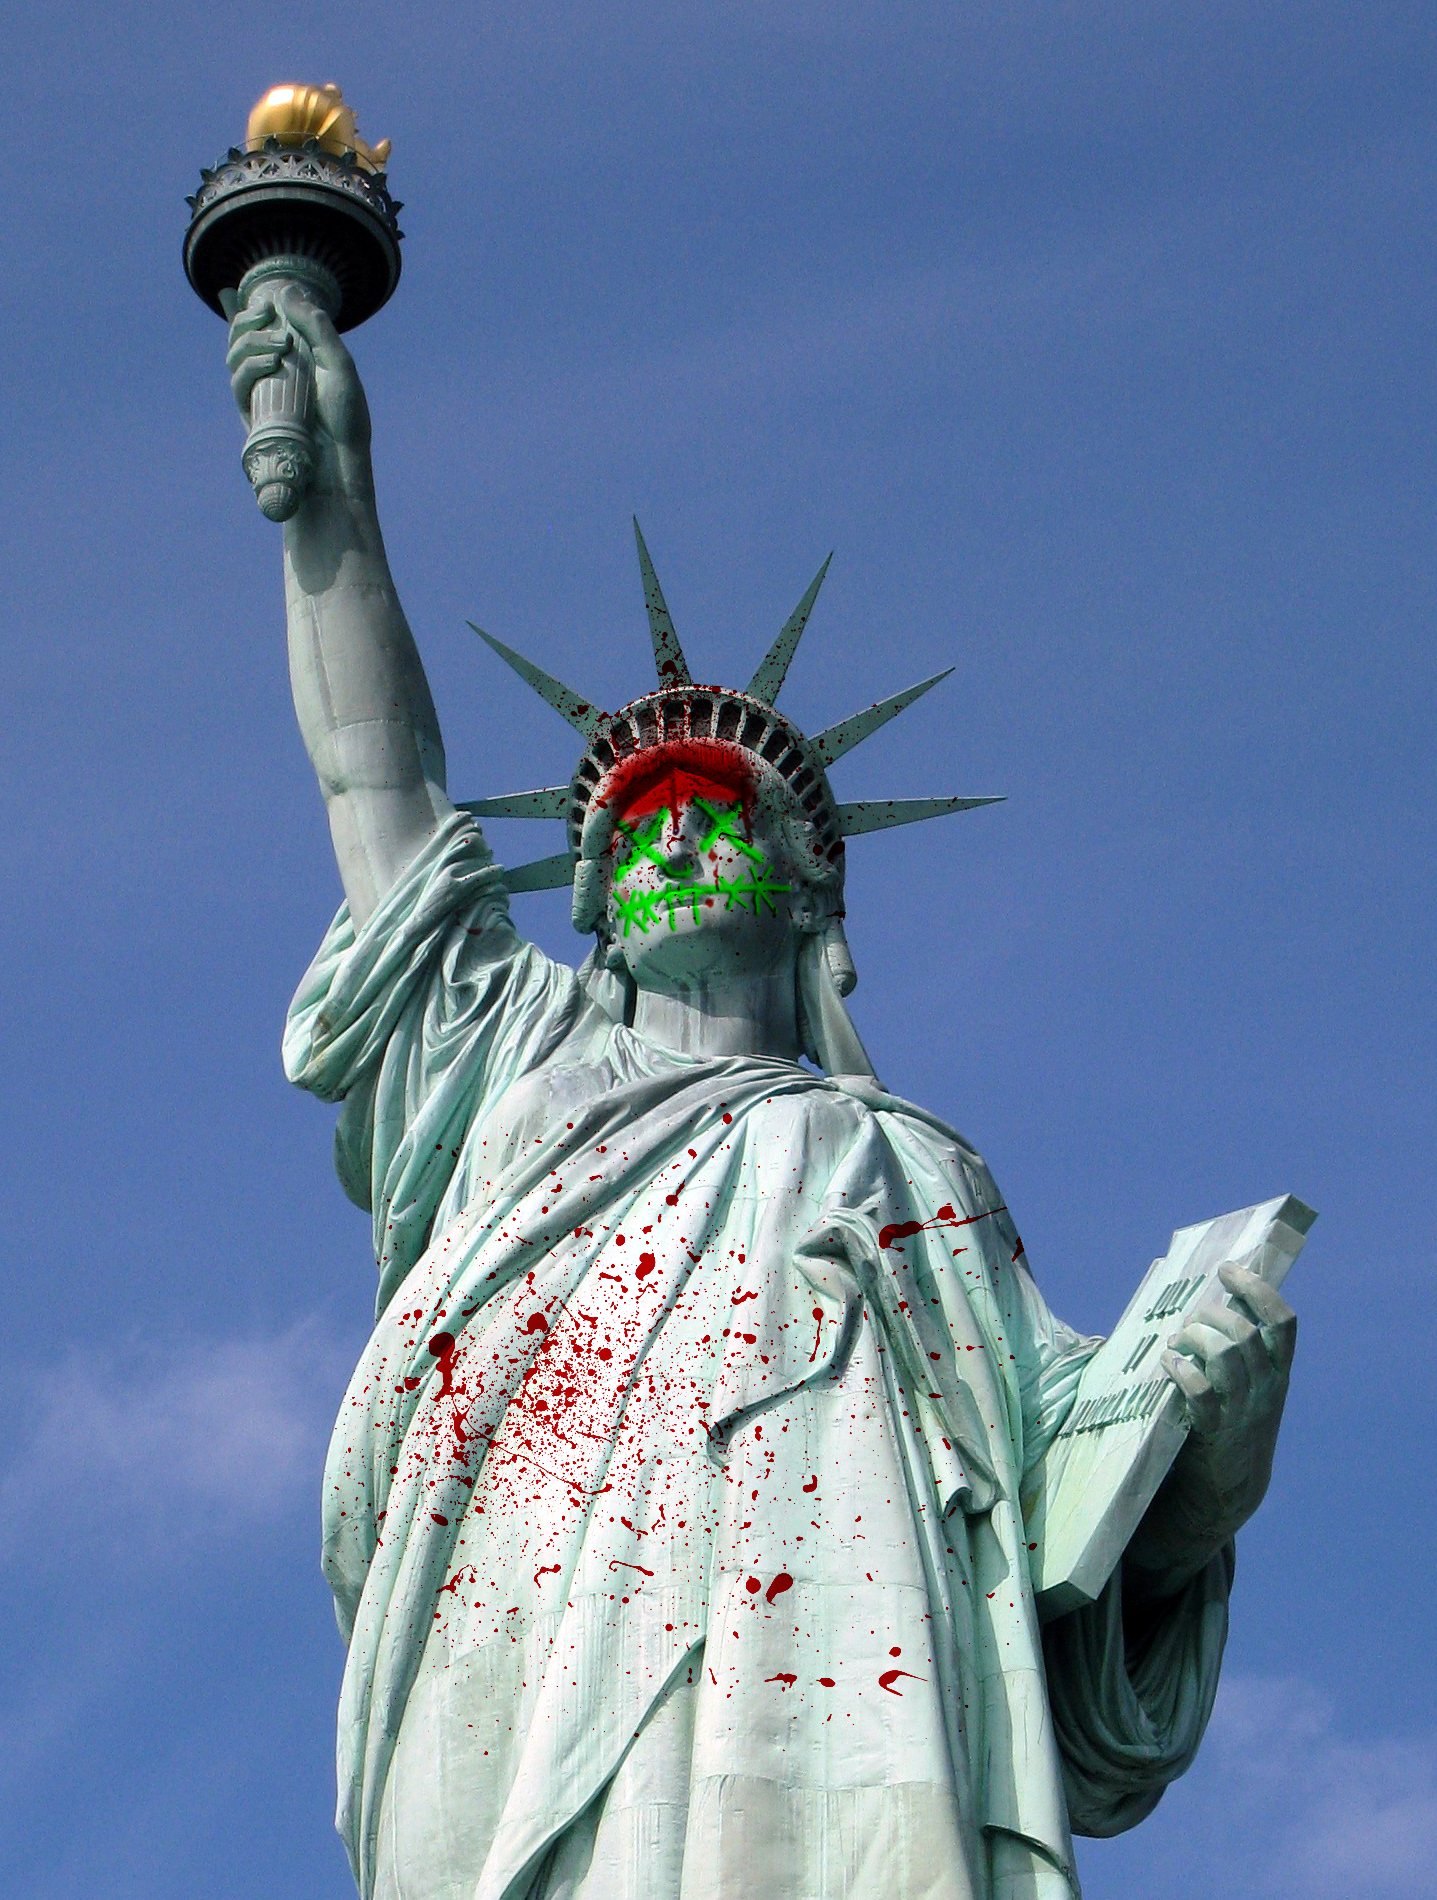 The Purge Election Year Statue Of Liberty By FearOfTheBlackWolf On.